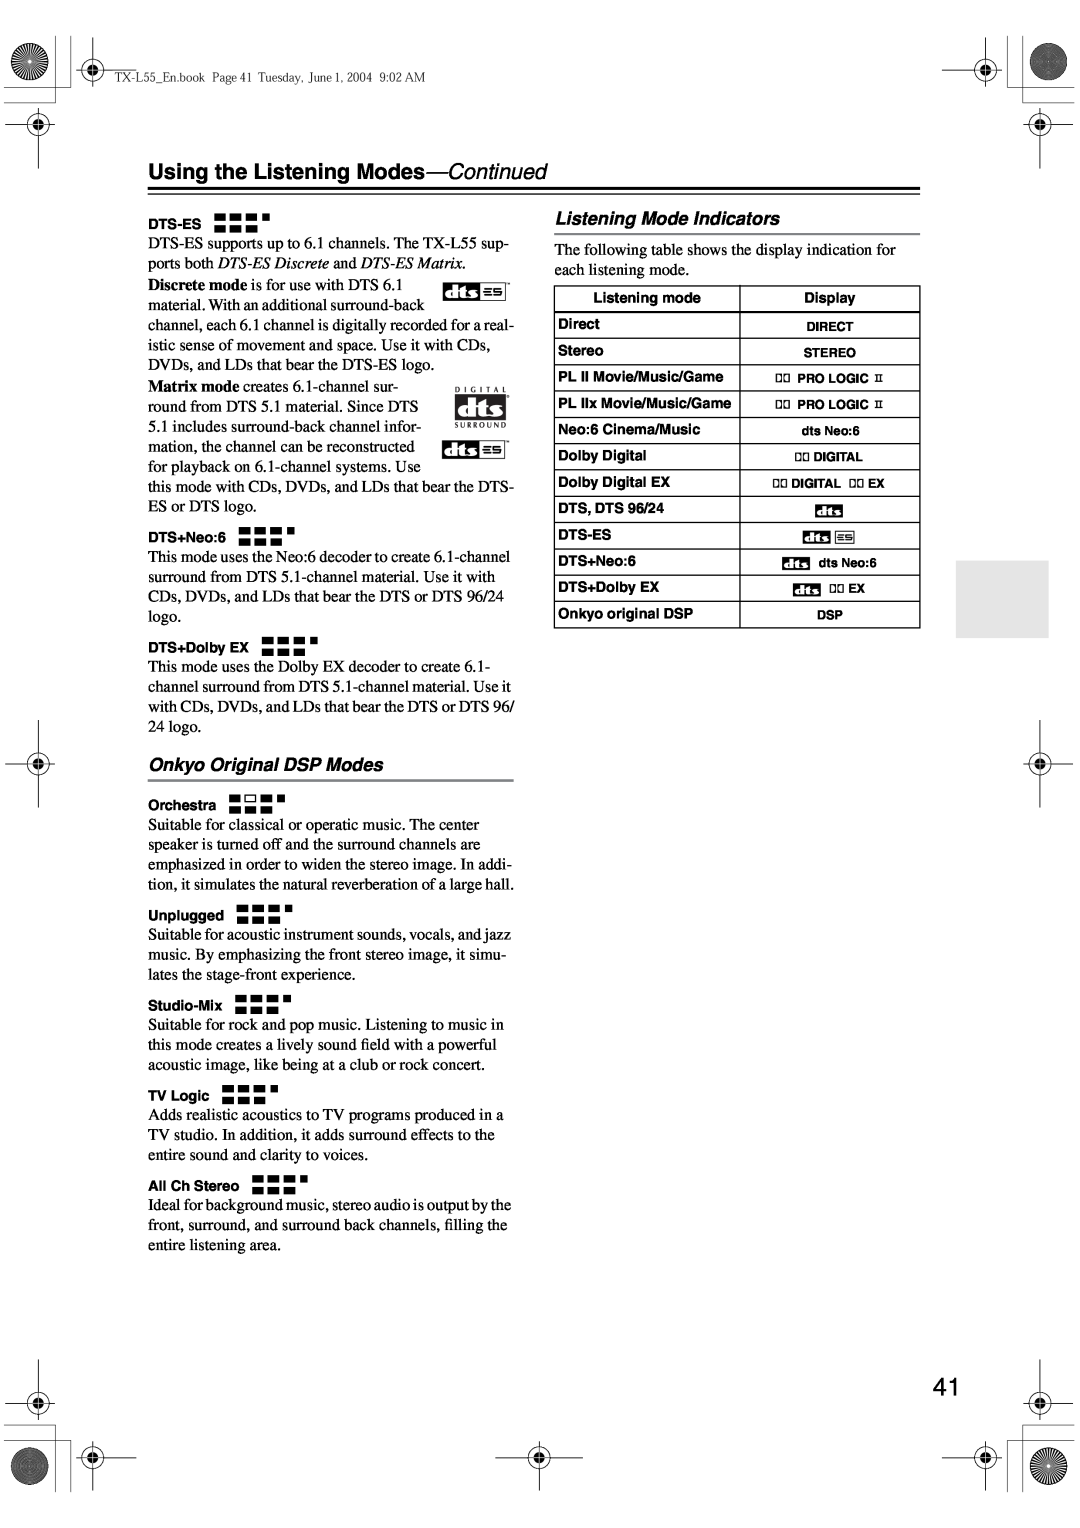 Onkyo TX-L55 instruction manual Using the Listening Modes-Continued, Onkyo Original DSP Modes, Listening Mode Indicators 